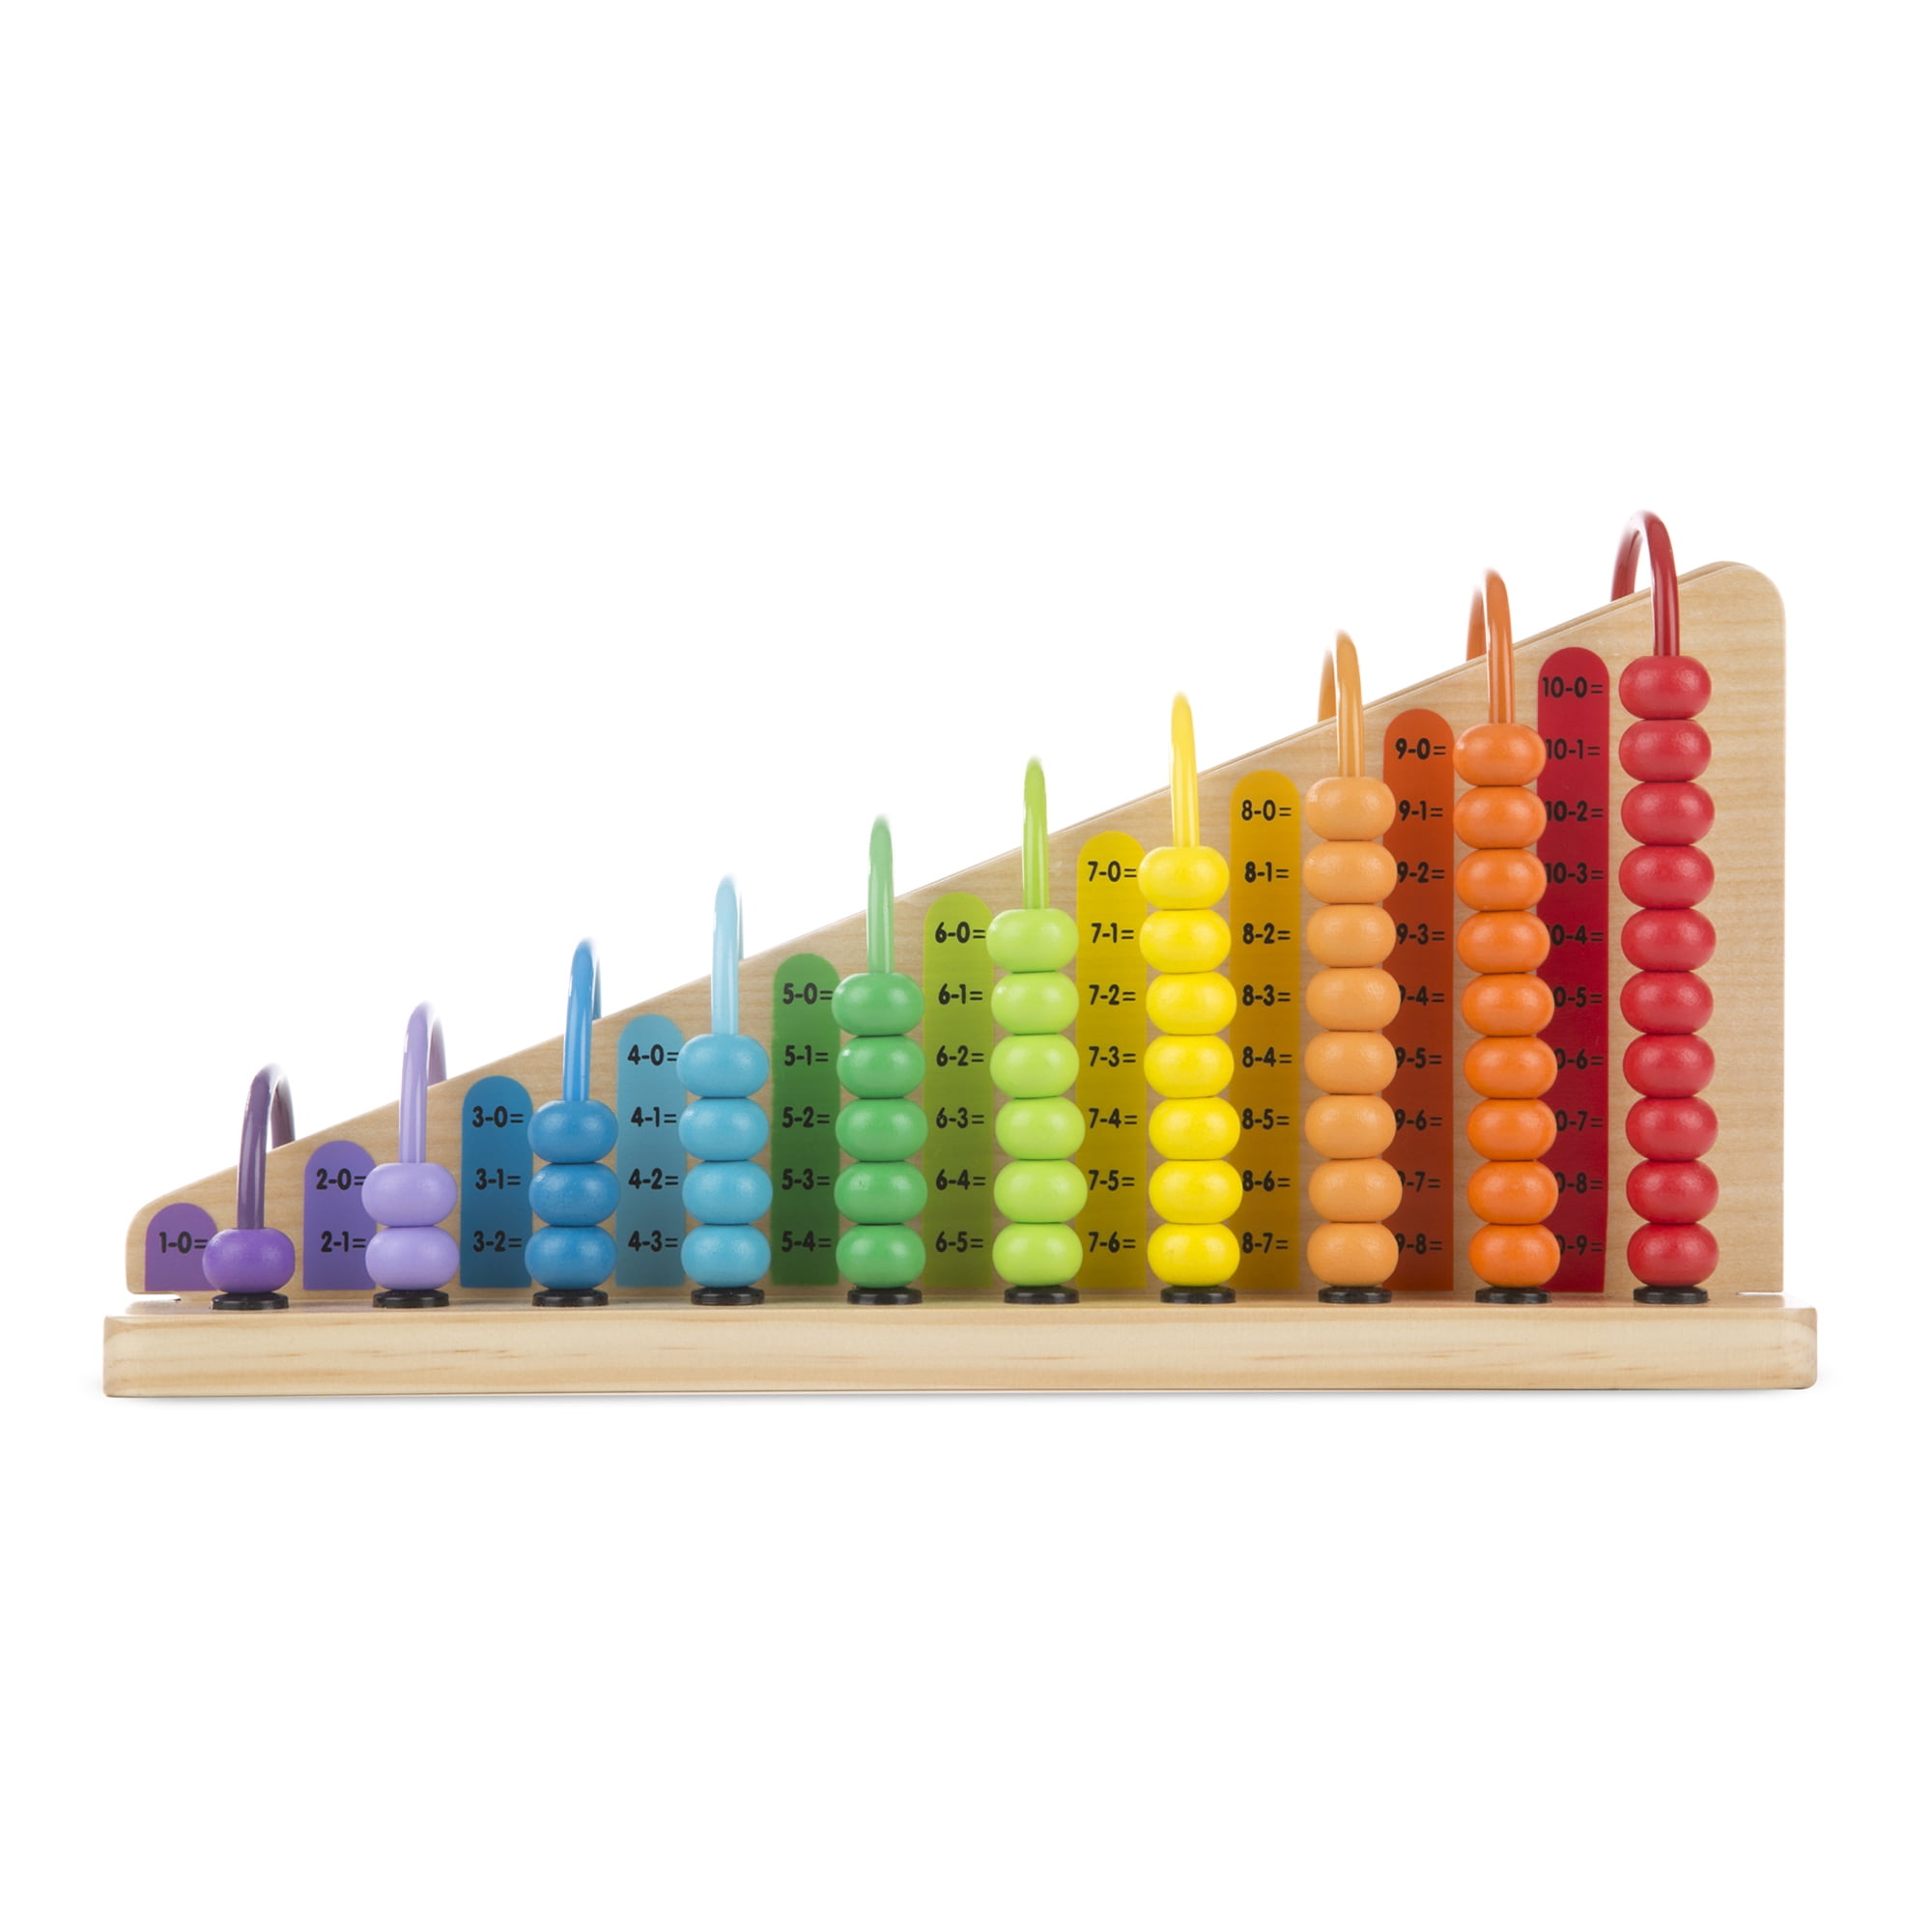 Wooden Bead Abacus Kids Educational Math Learning Toy Counting Numbers SPM 